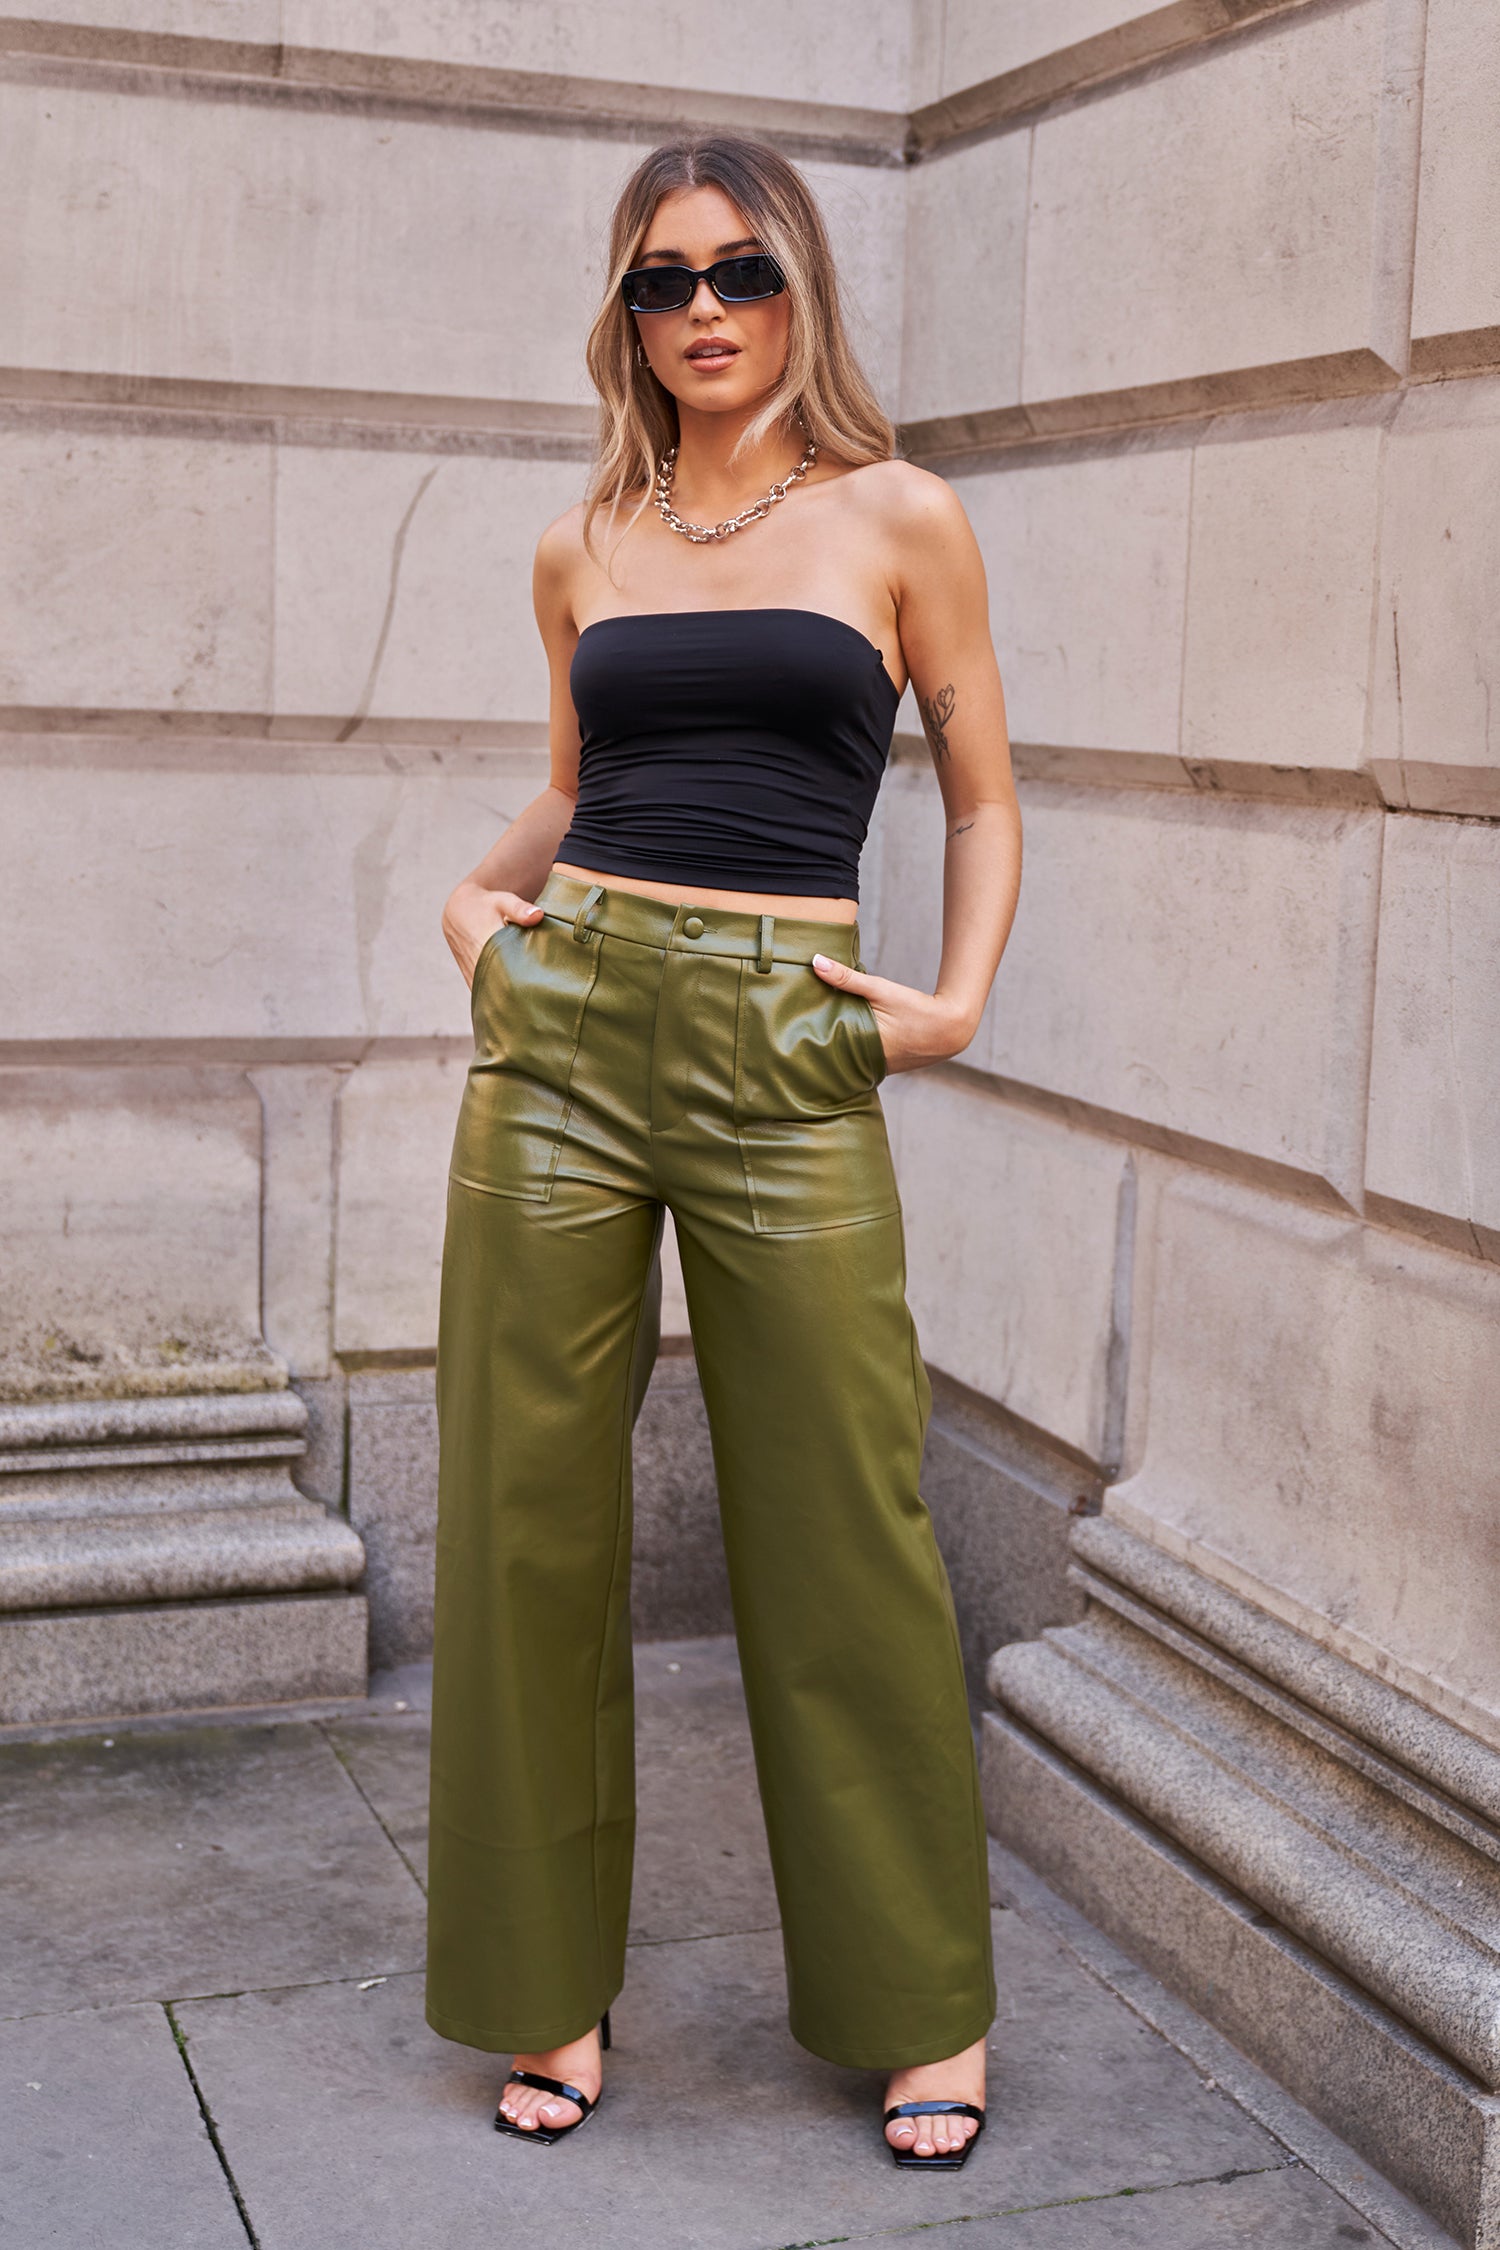 Women's Trousers | High Waisted, Wide Leg & Slim Fit Styles | UNIQUE21